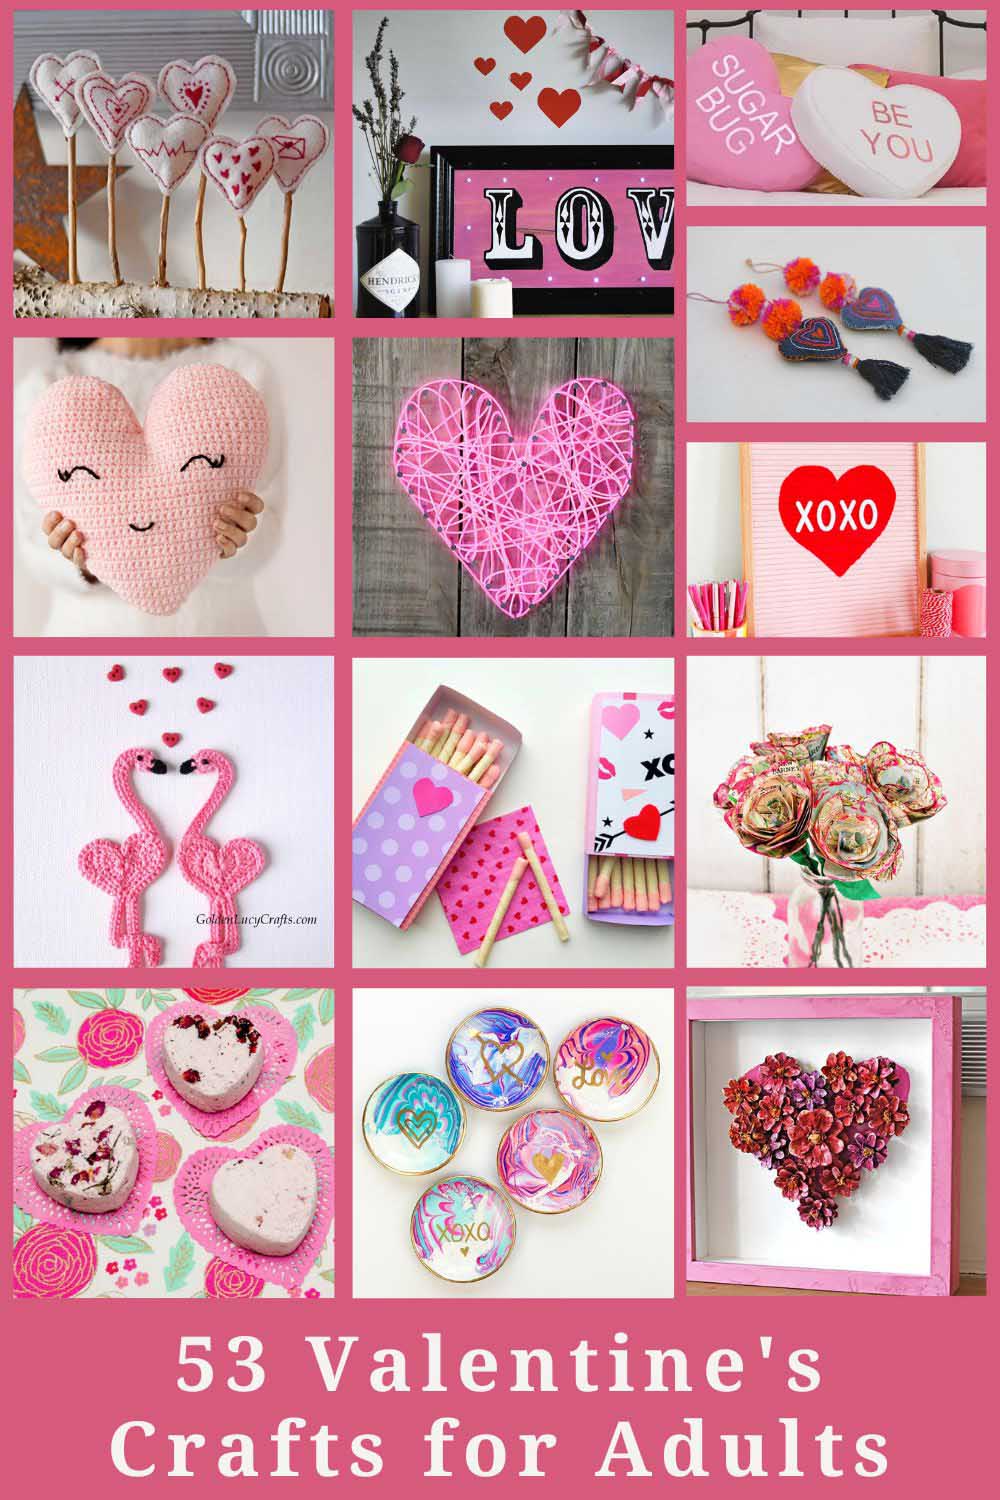 57 Valentine Craft Ideas For Adults - You'll Want To Try - Pillar